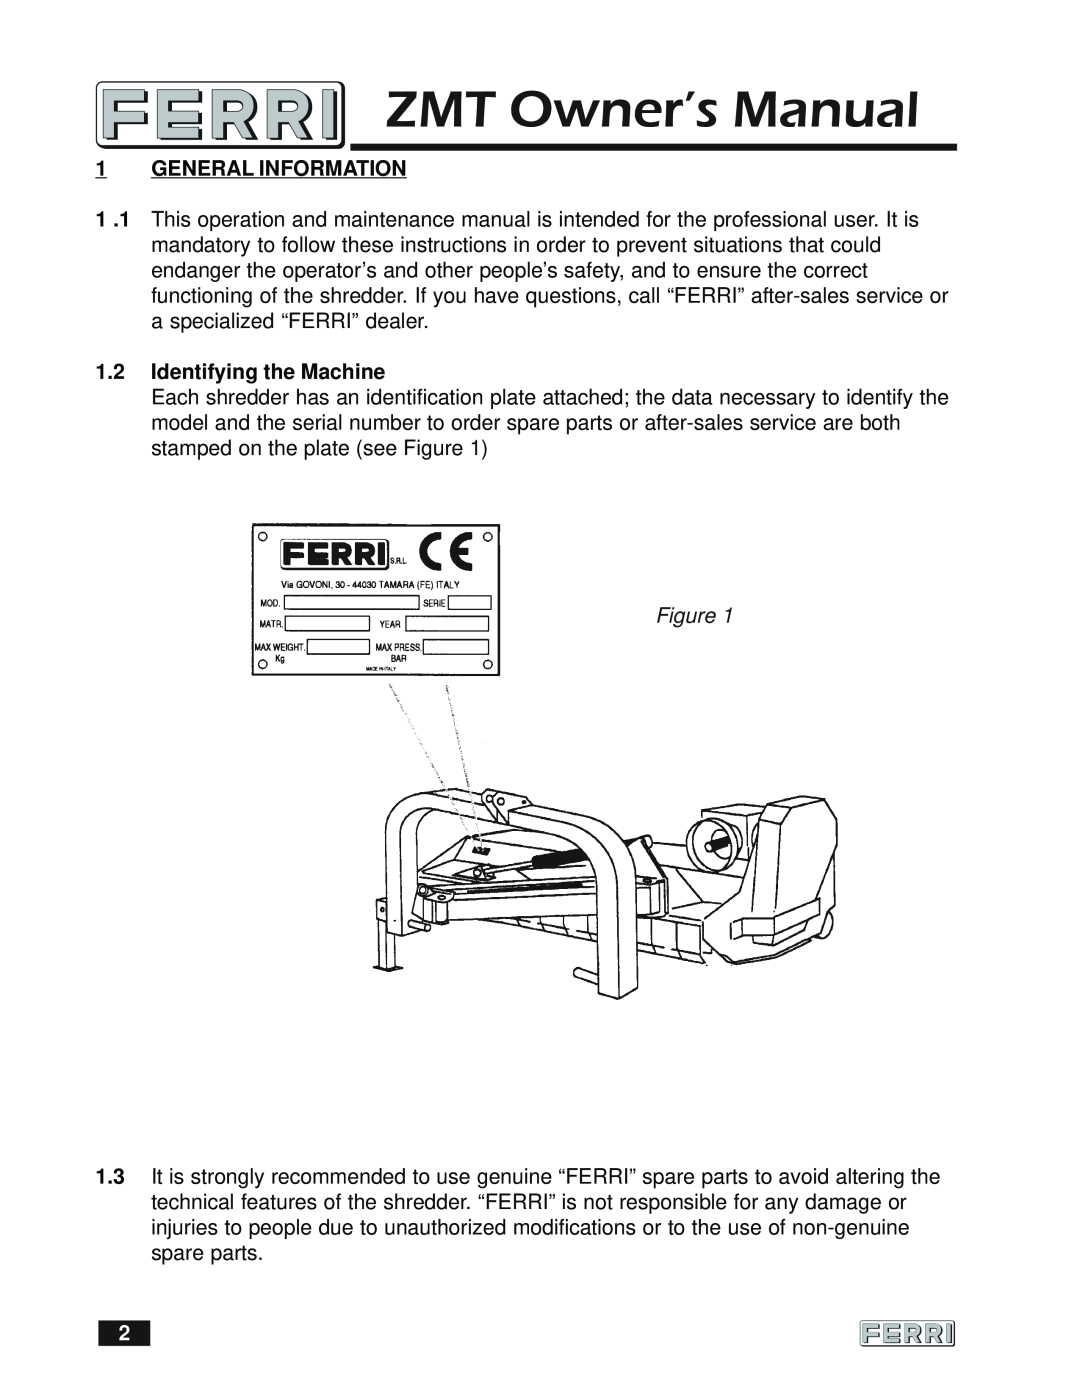 Ferris Industries 160 owner manual General Information, 1.2Identifying the Machine 